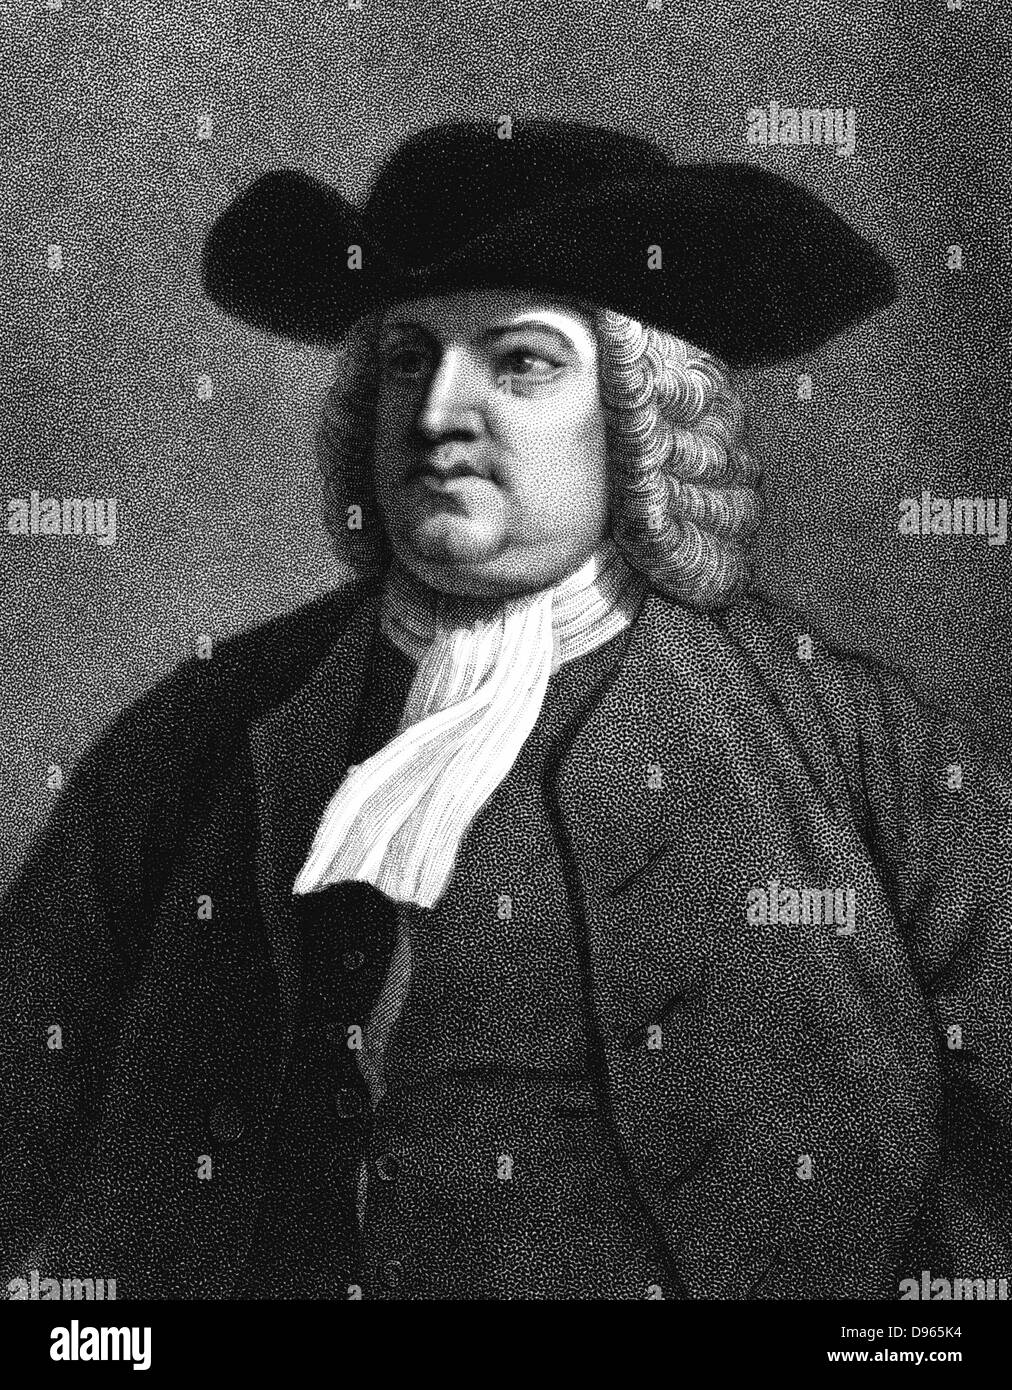 William Penn (1644-1718) English member of the Society of Friends, popularly known as Quakers. Established  Pennsylvania, America. Engraving 1837. Stock Photo